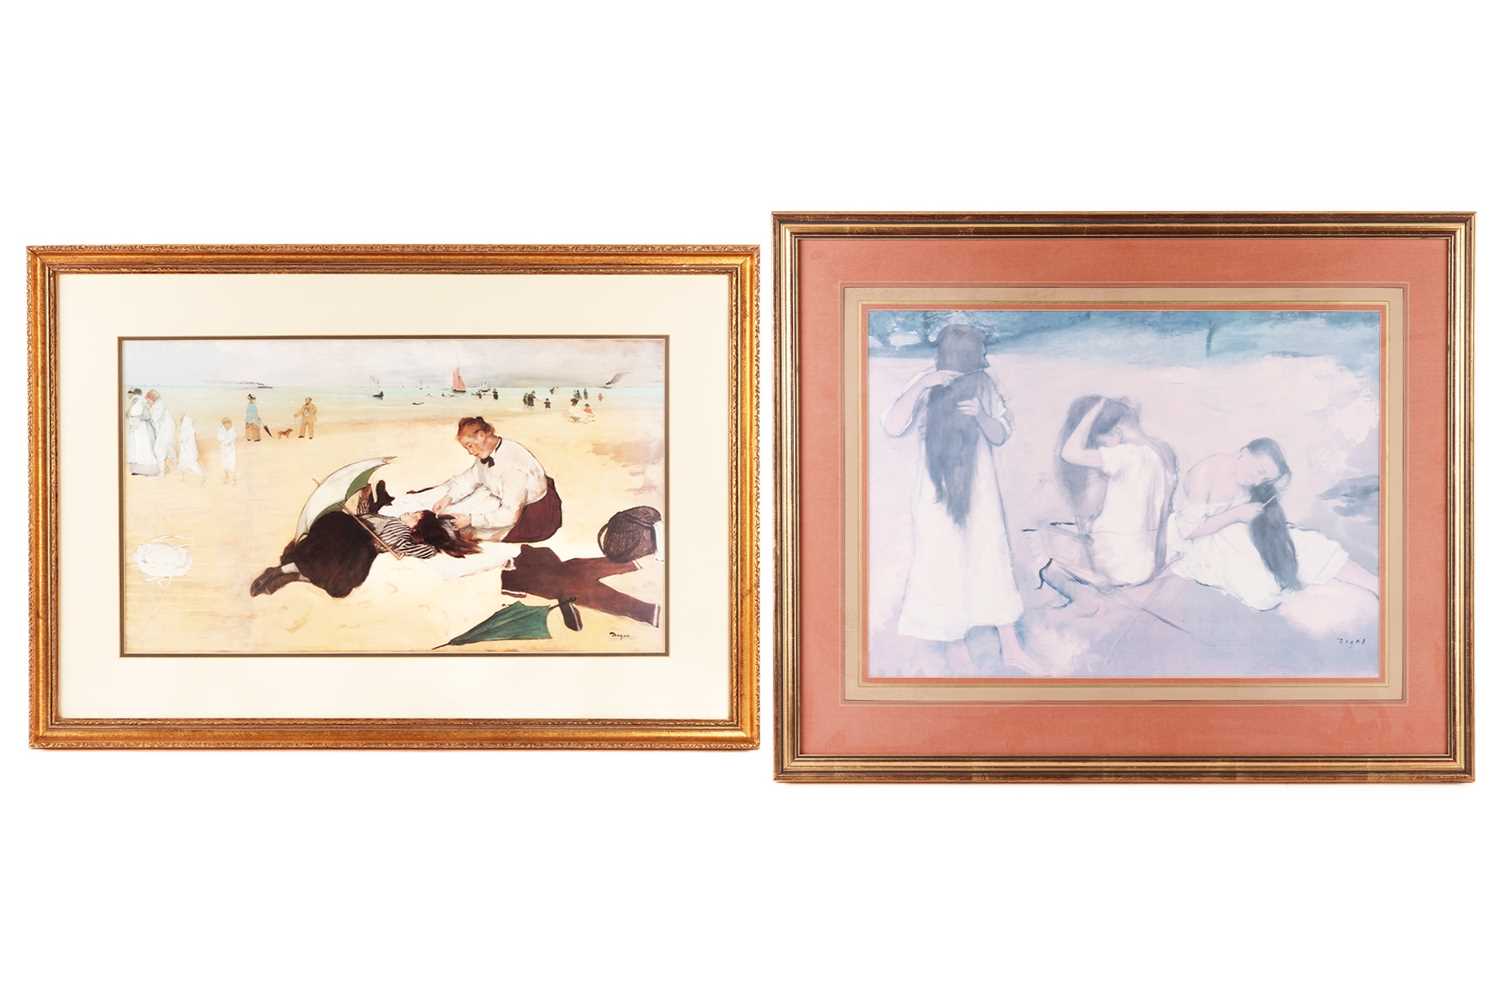 Two prints after Edgar Degas, 'Beach Scene' and 'Women Combing Their Hair', both lithographs, both g